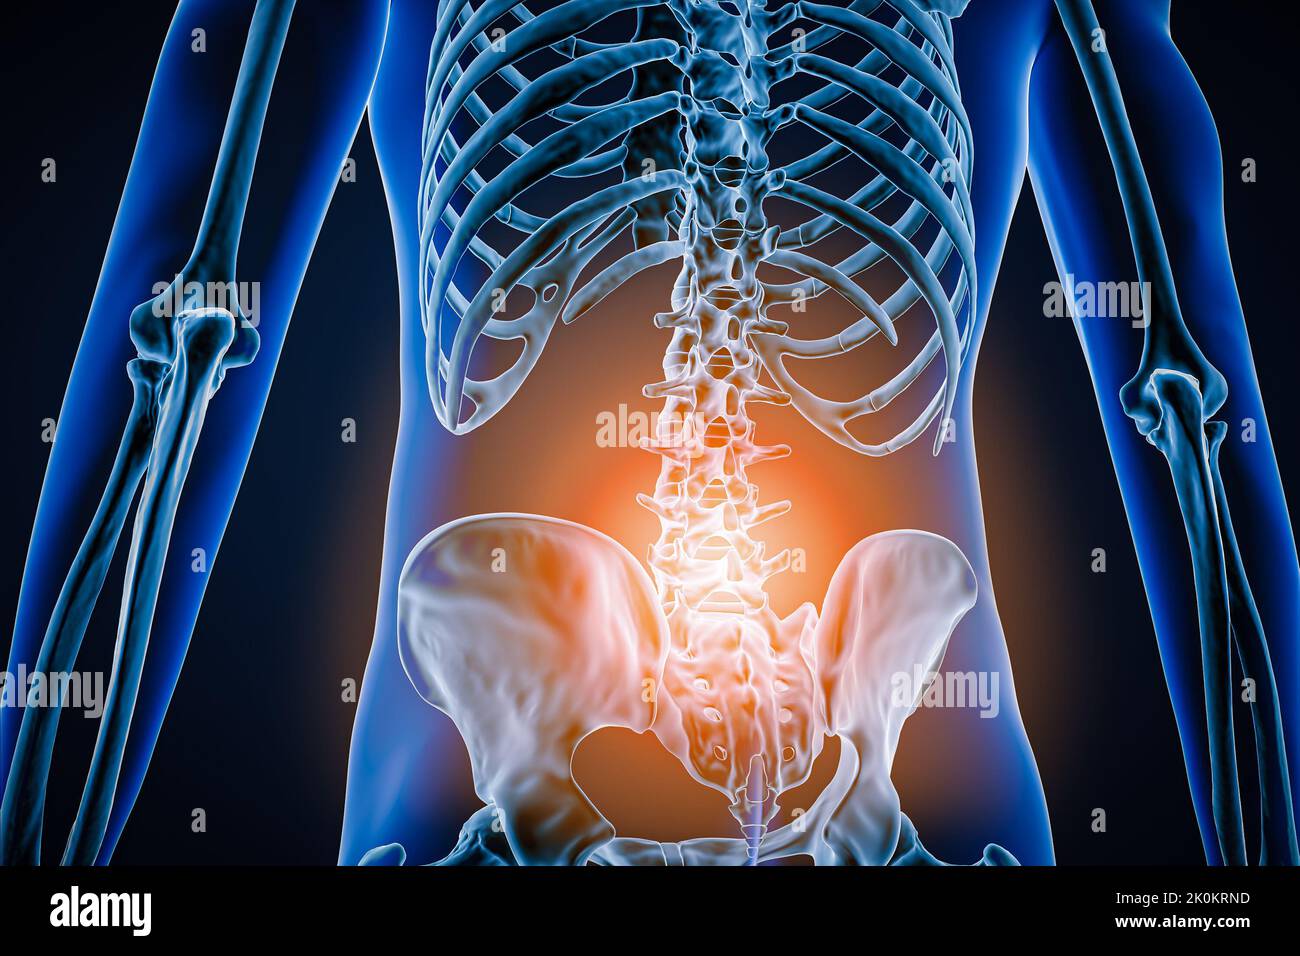 Posterior or back view of human spine or spinal column with inflammation or injury 3D rendering illustration. Pathology, backbone pain, anatomy, lumba Stock Photo